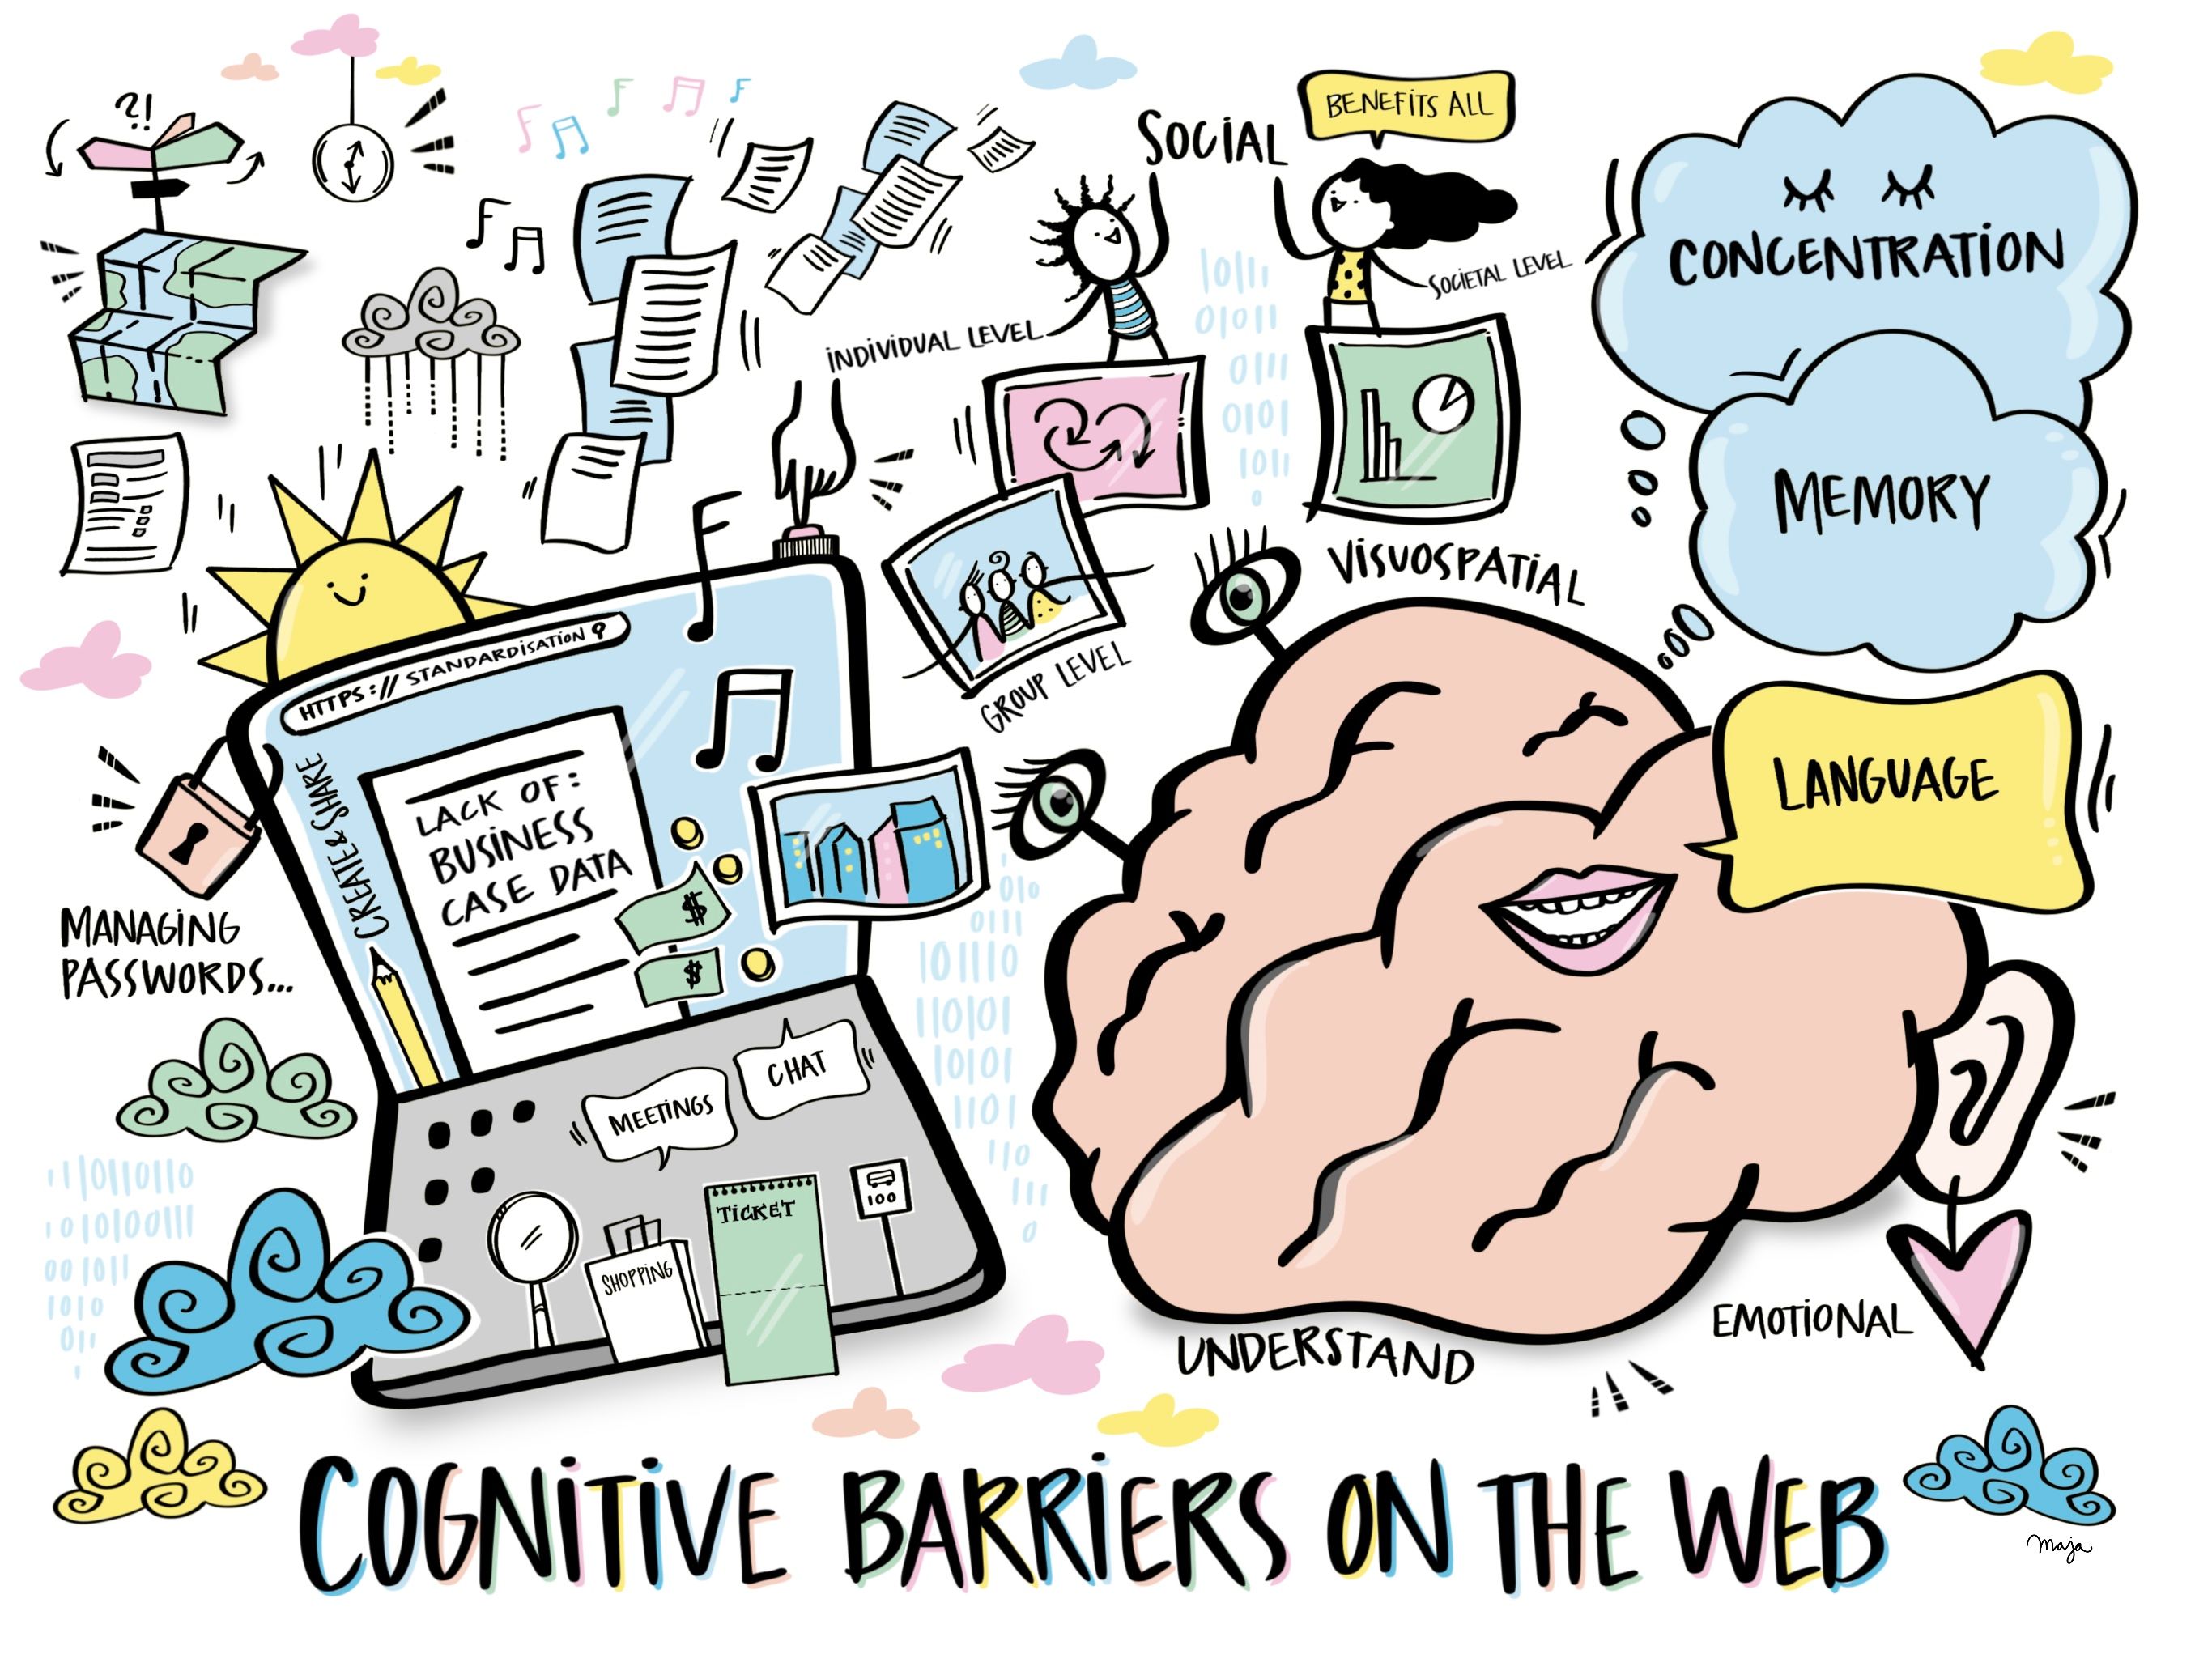 To support the participants cognitively, the workshop results were presented in a graphic recording by Maja Larsson.